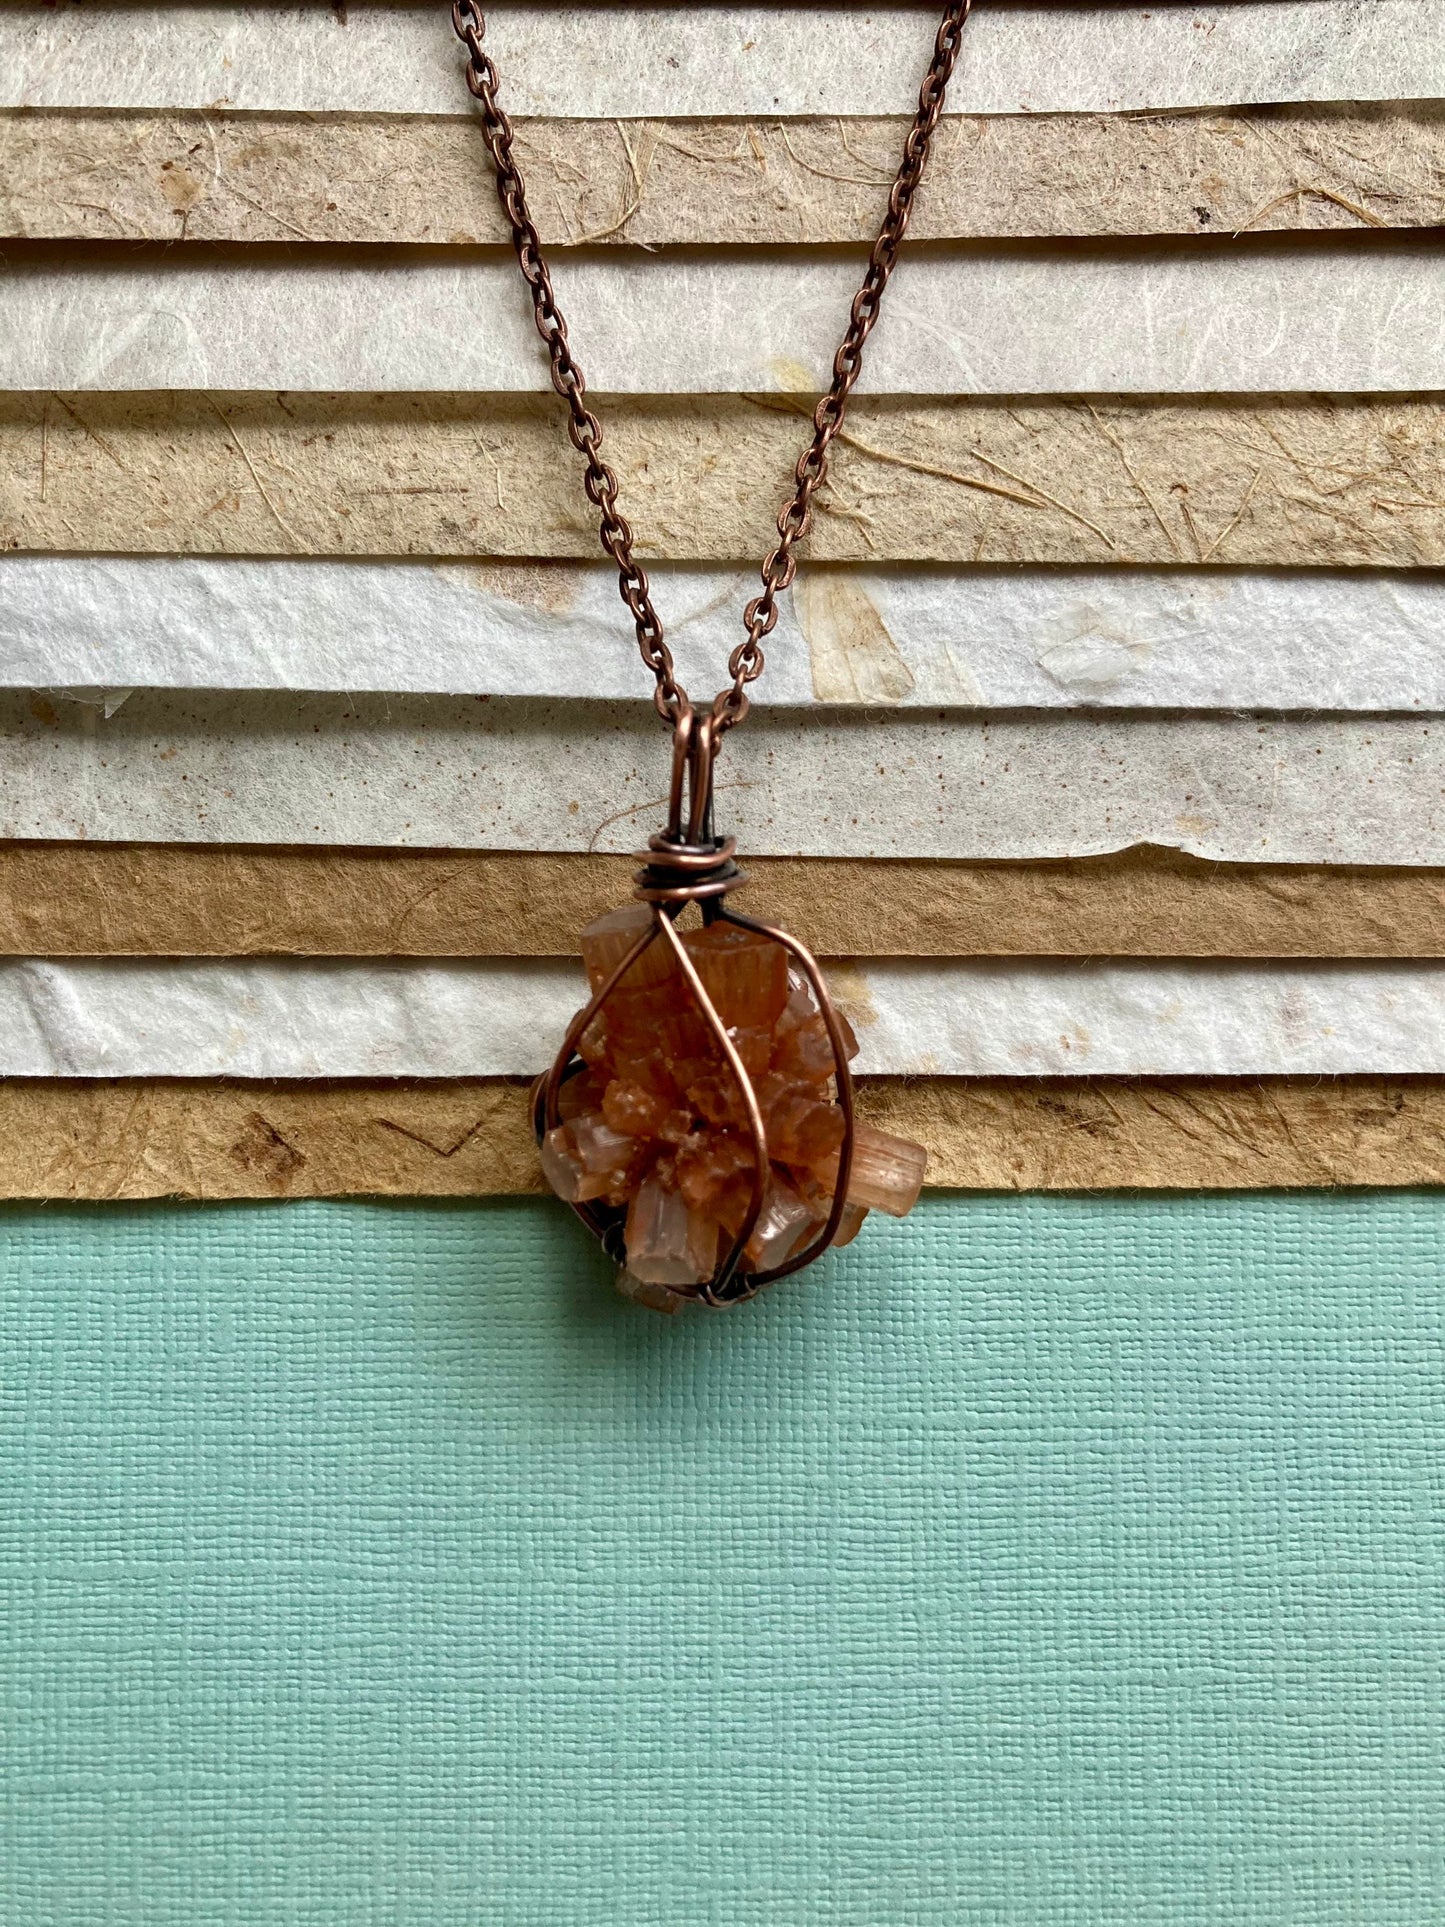 Aragonite pendant handmade necklace wire wrapped natural stone with 18 inch length chain